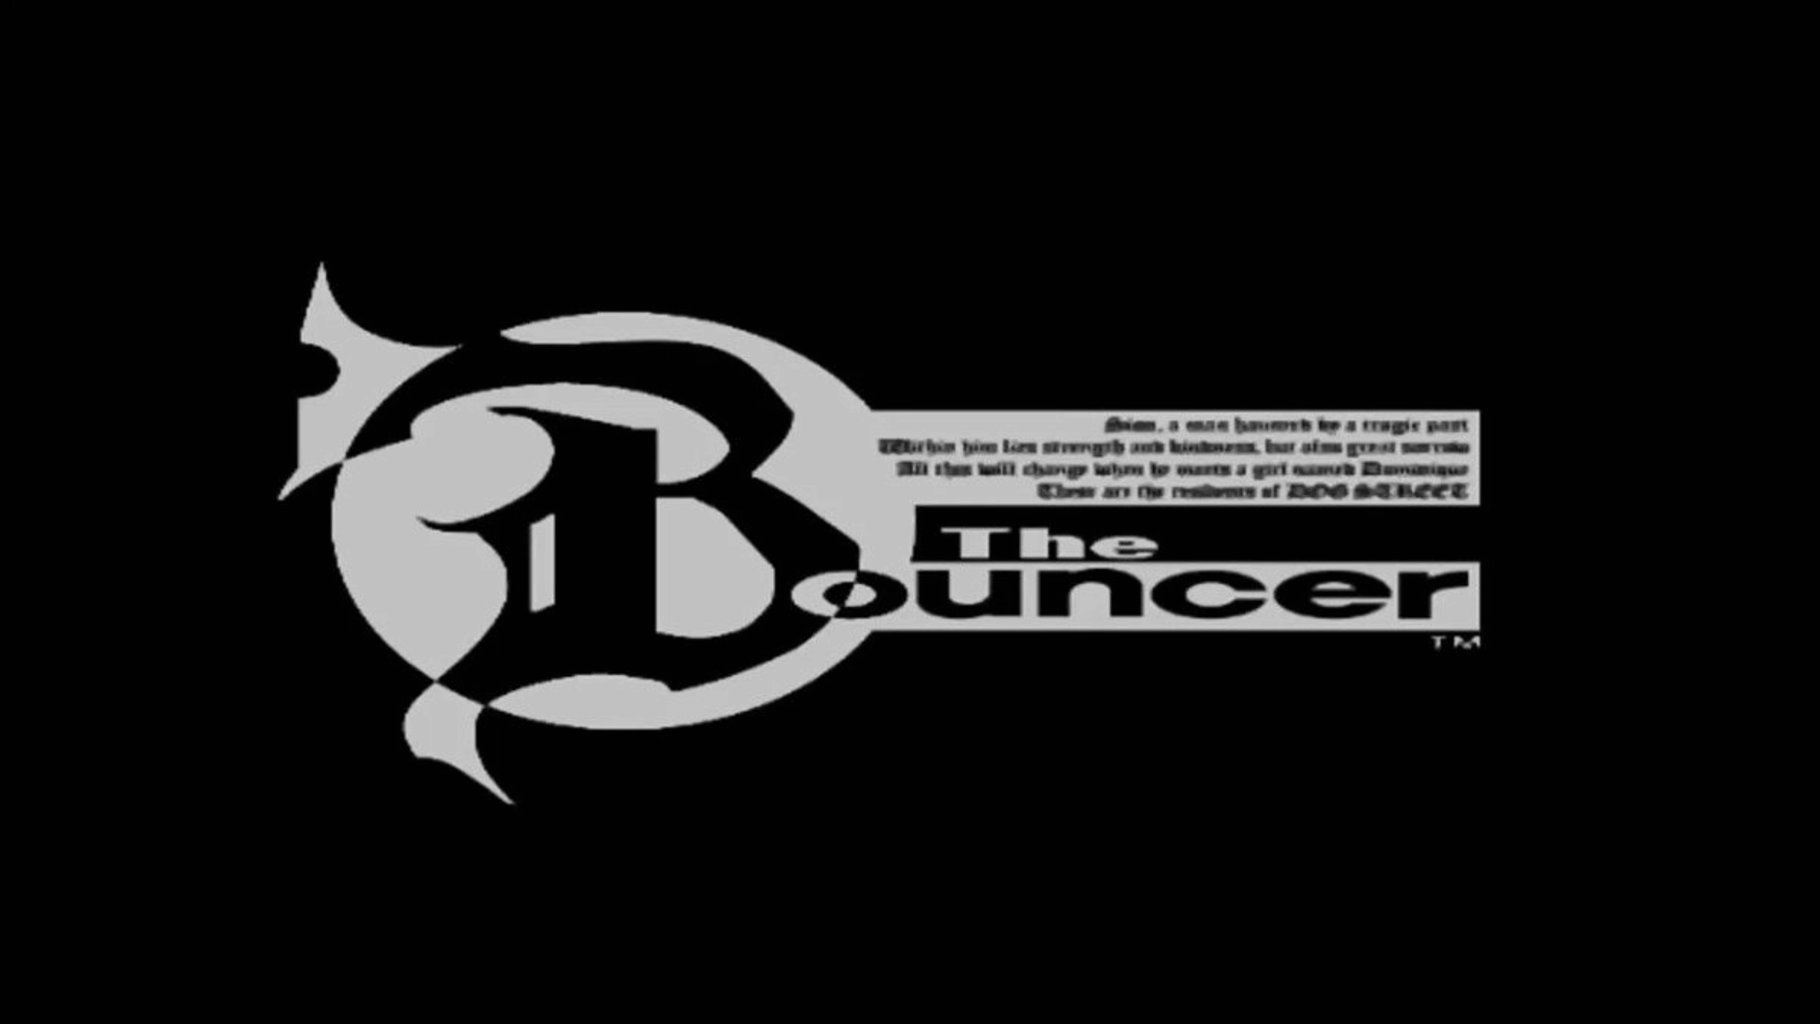 The Bouncer (2000)